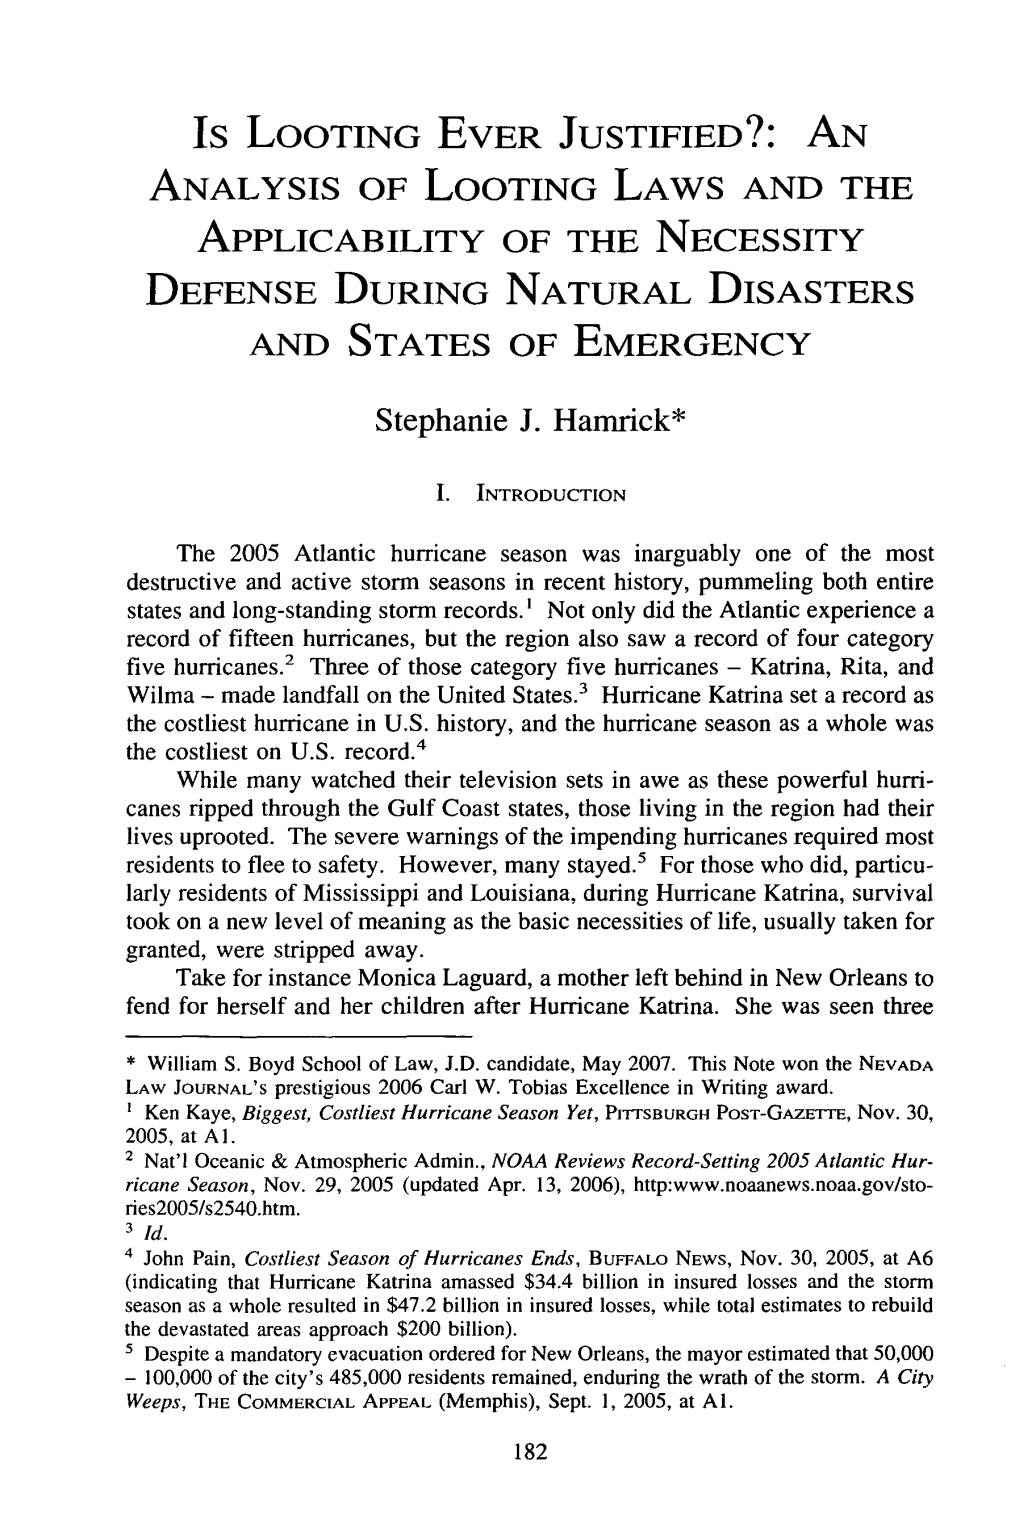 Is LOOTING EVER JUSTIFIED?: an ANALYSIS of LOOTING LAWS and the APPLICABILITY of the NECESSITY DEFENSE DURING NATURAL DISASTERS and STATES of EMERGENCY